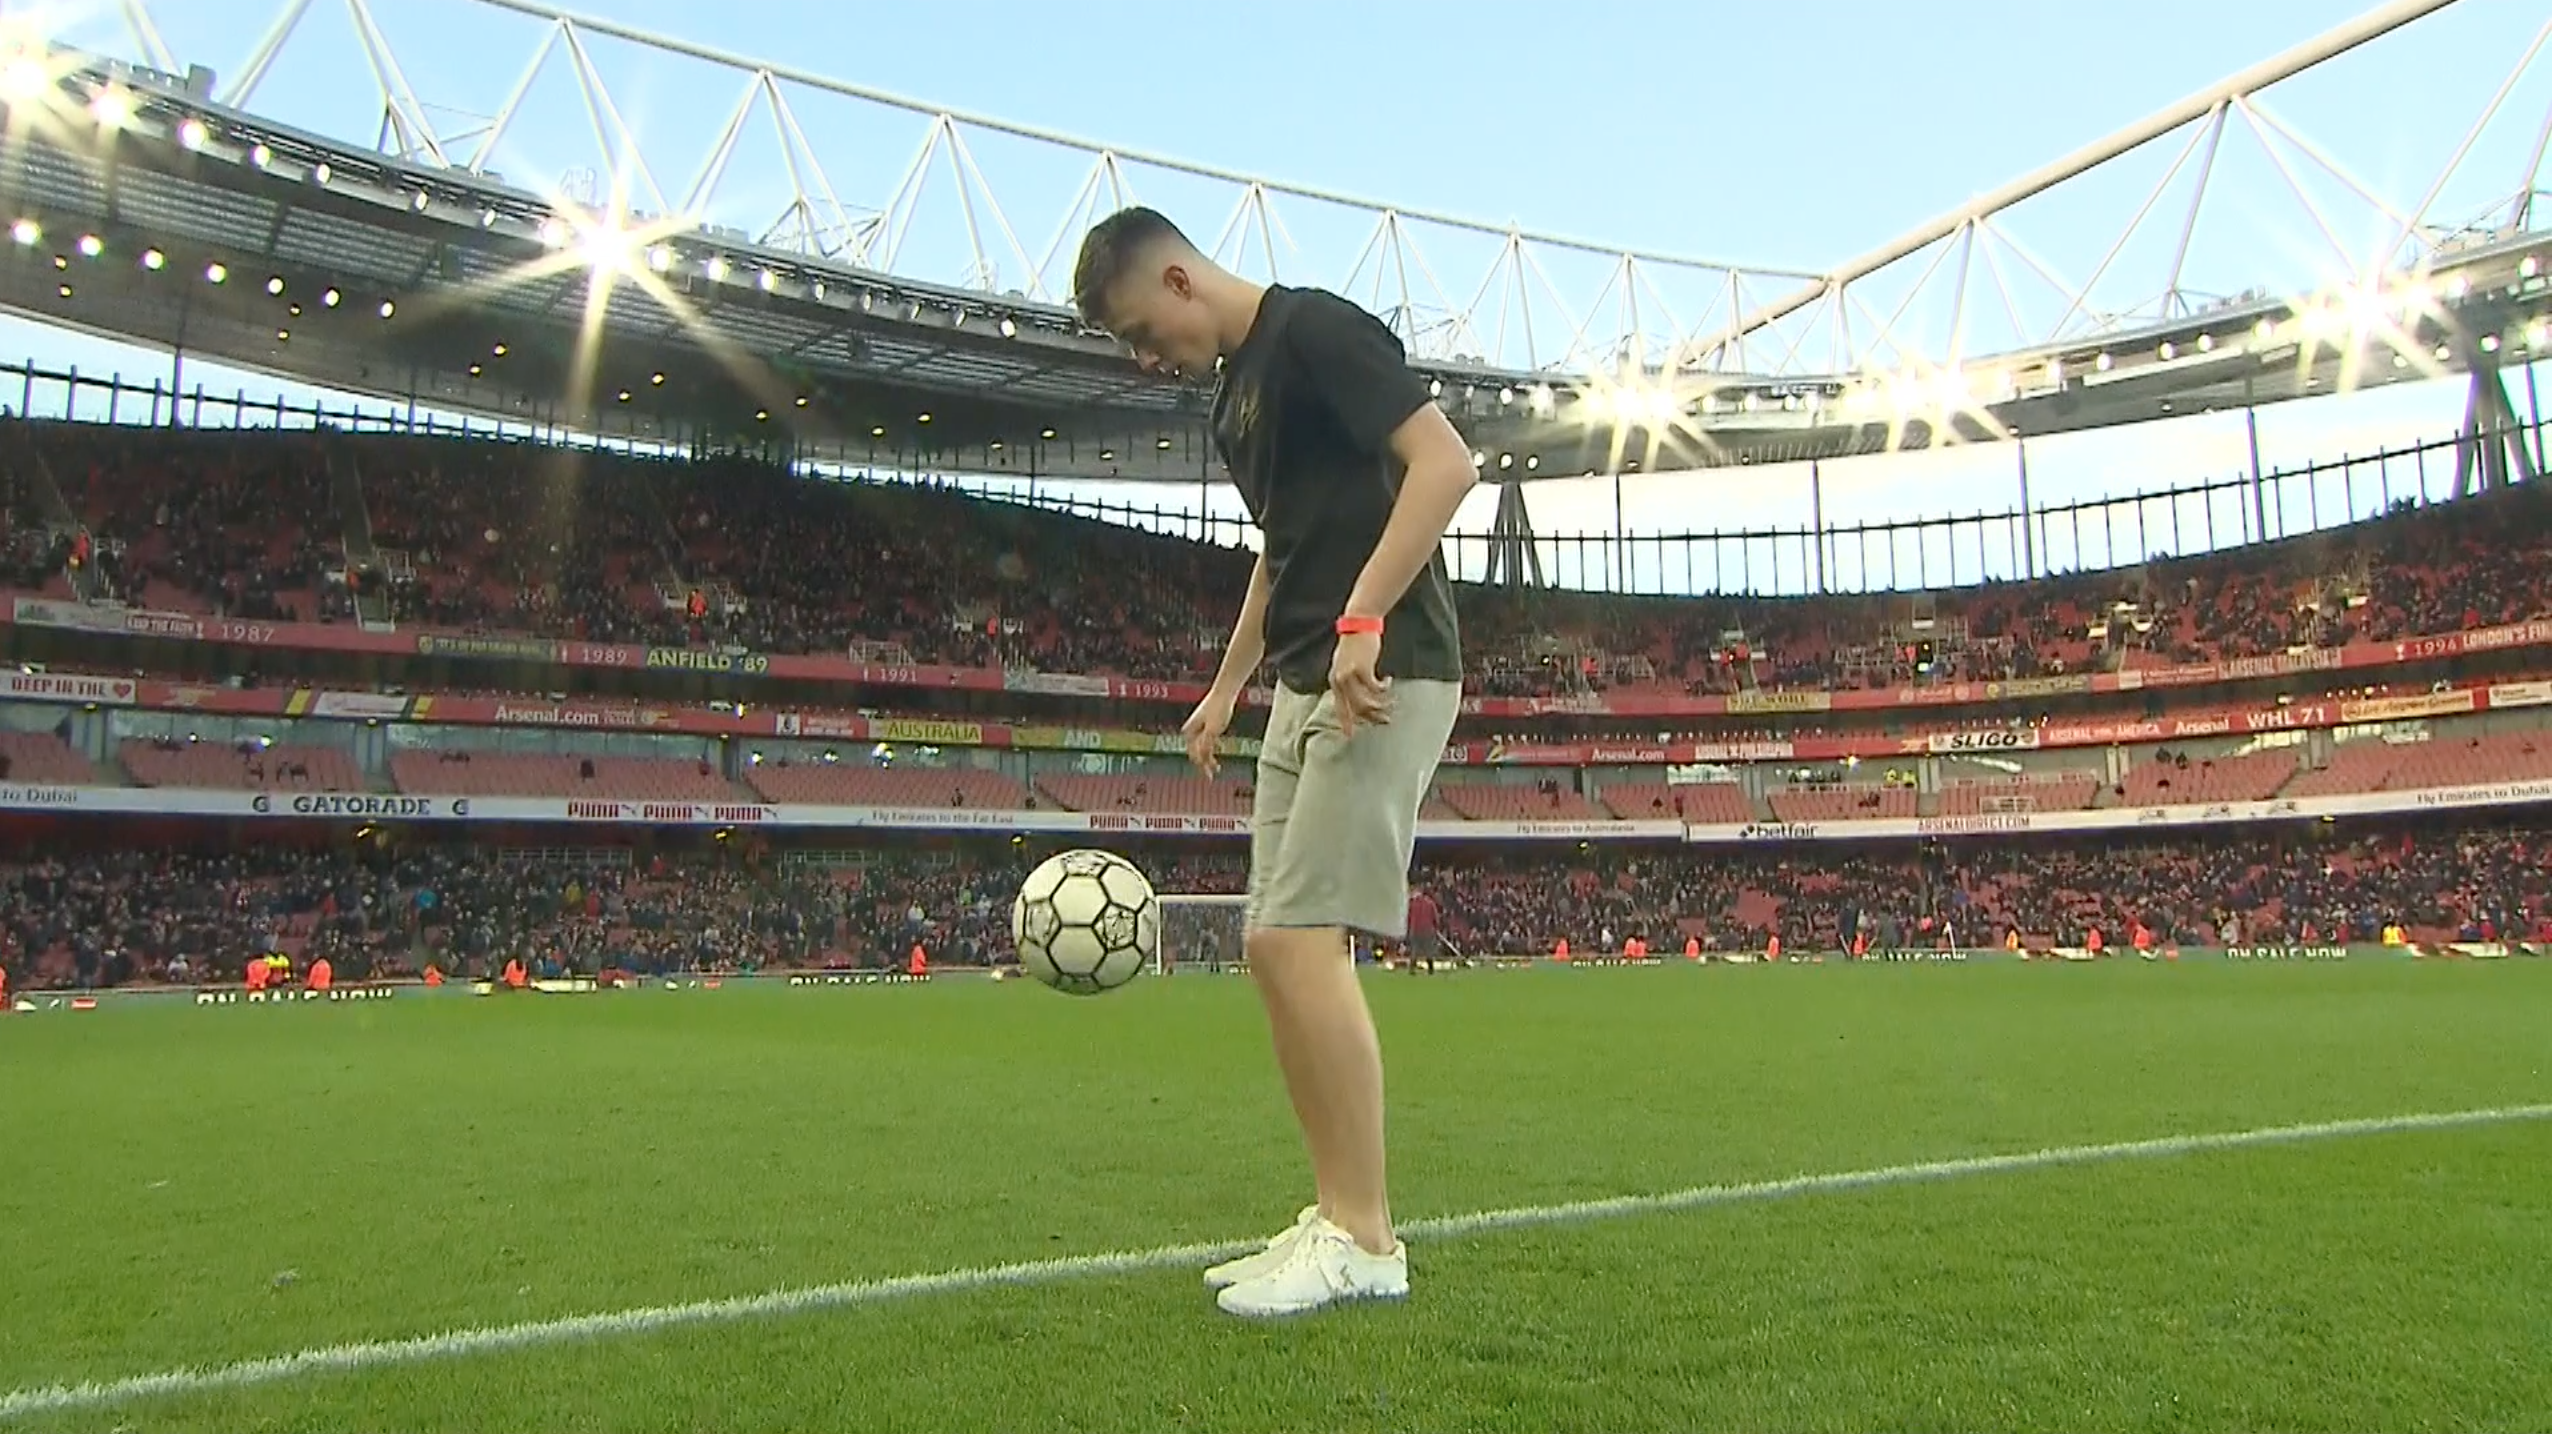 Ben Nuttall has performed around the world including at the Emirates Stadium